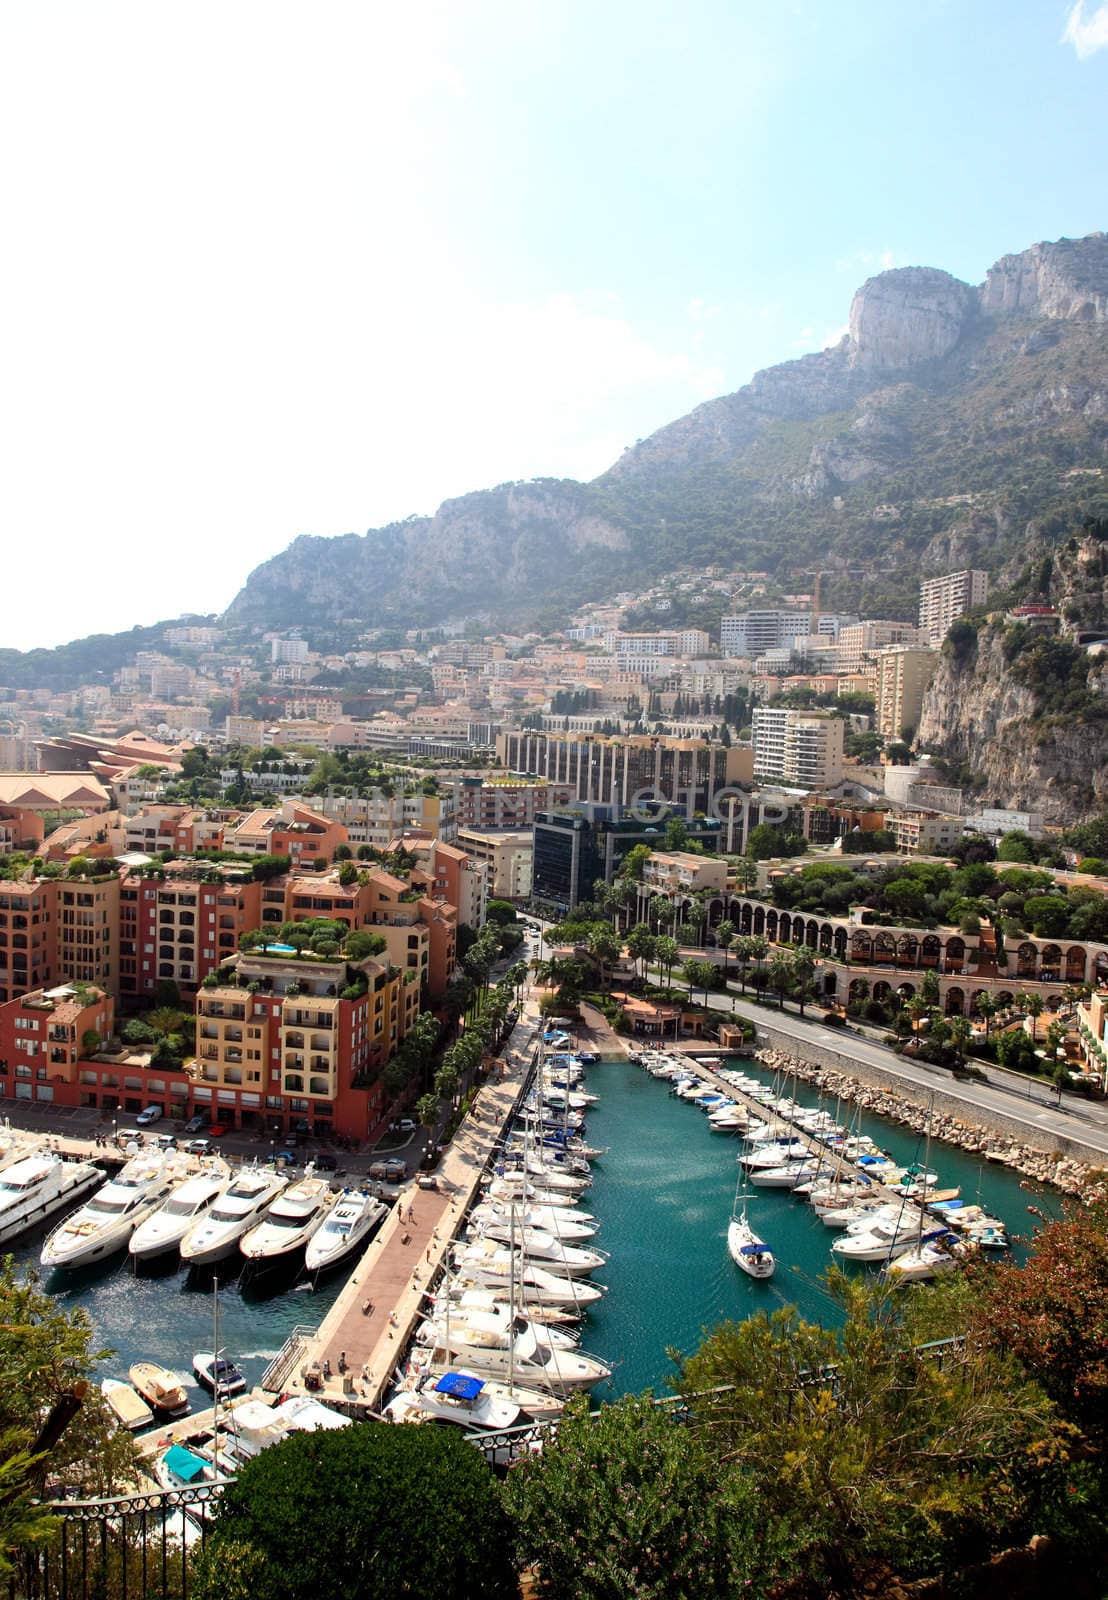 aerial view of the high-rise apartments and marina in Monaco by gary718